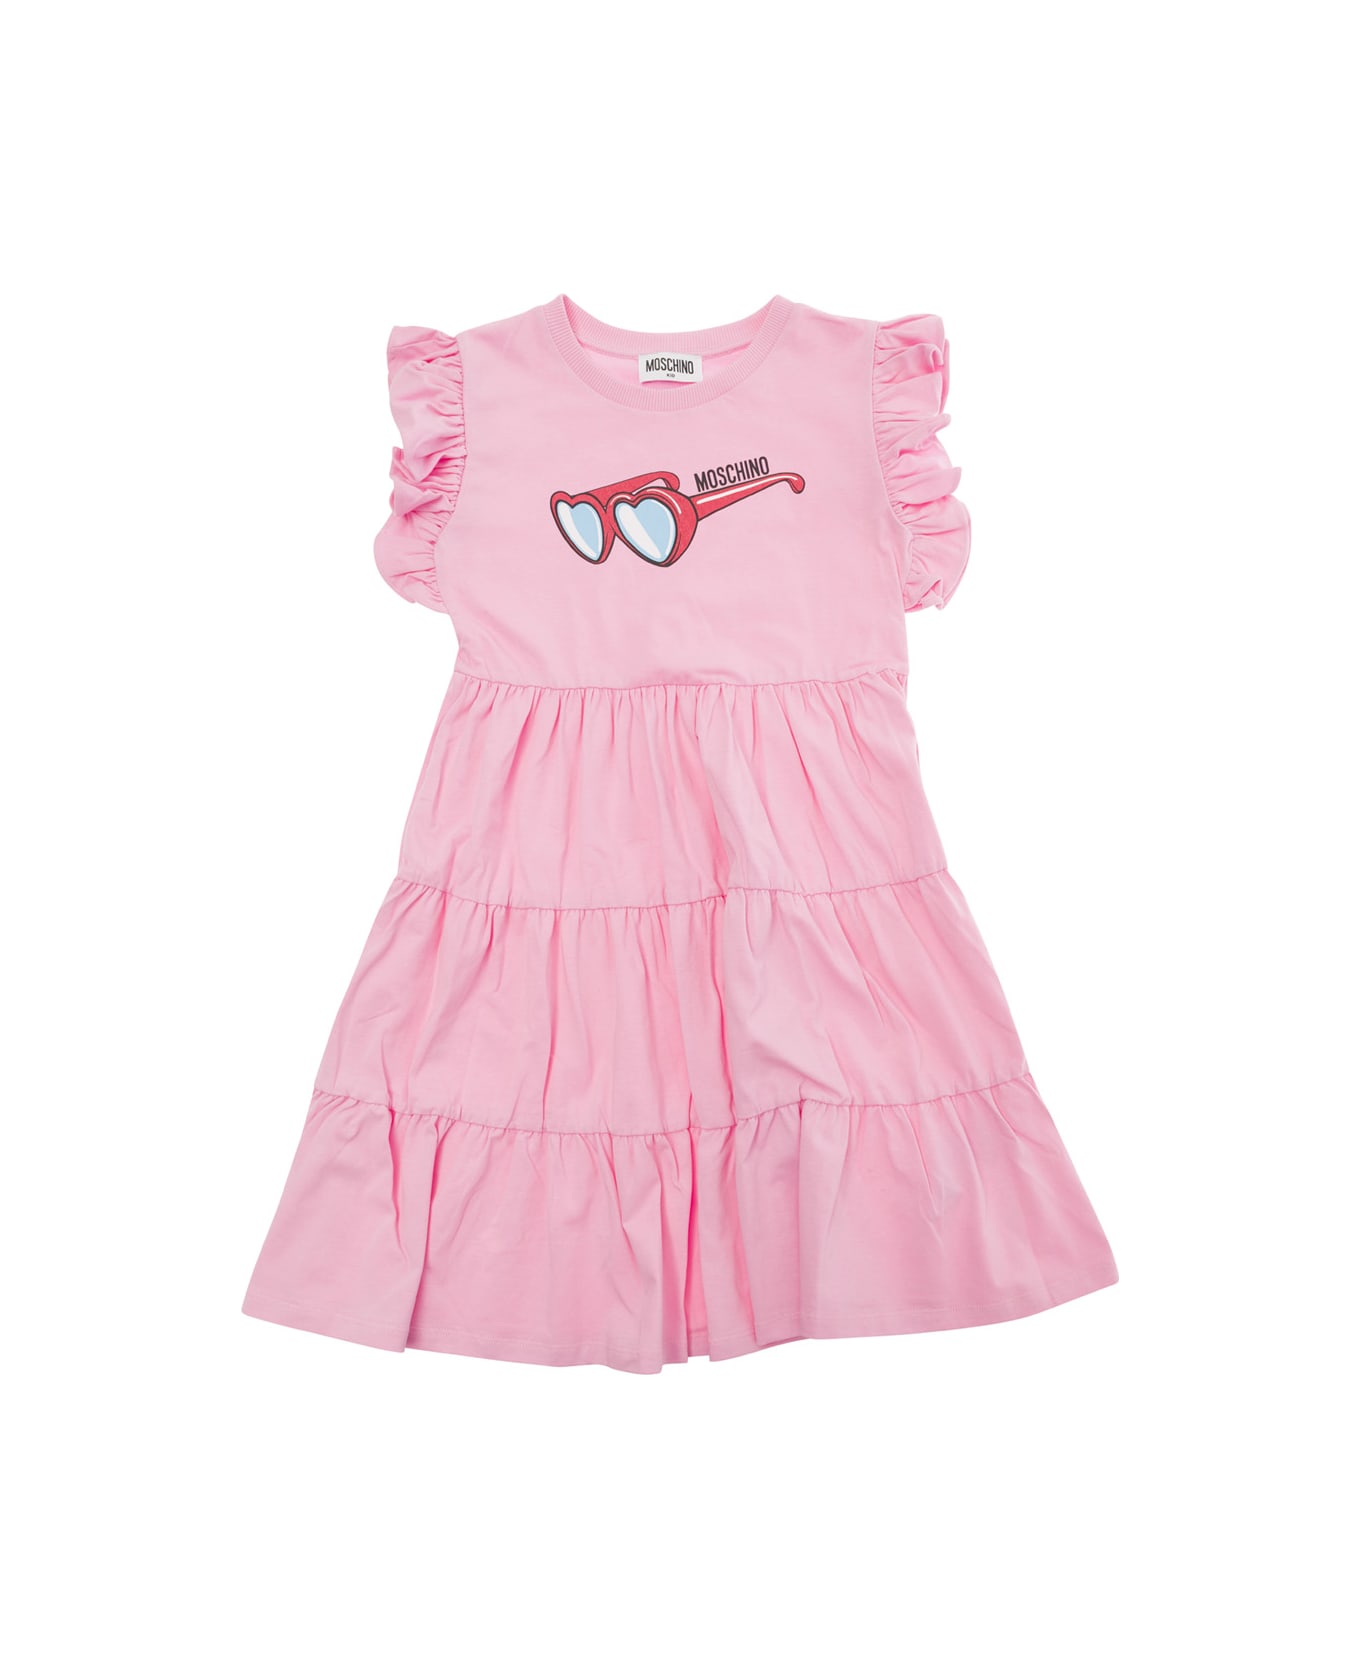 Moschino Pink Flounced Dress With Sunglasses Print In Stretch Cotton Girl - Pink